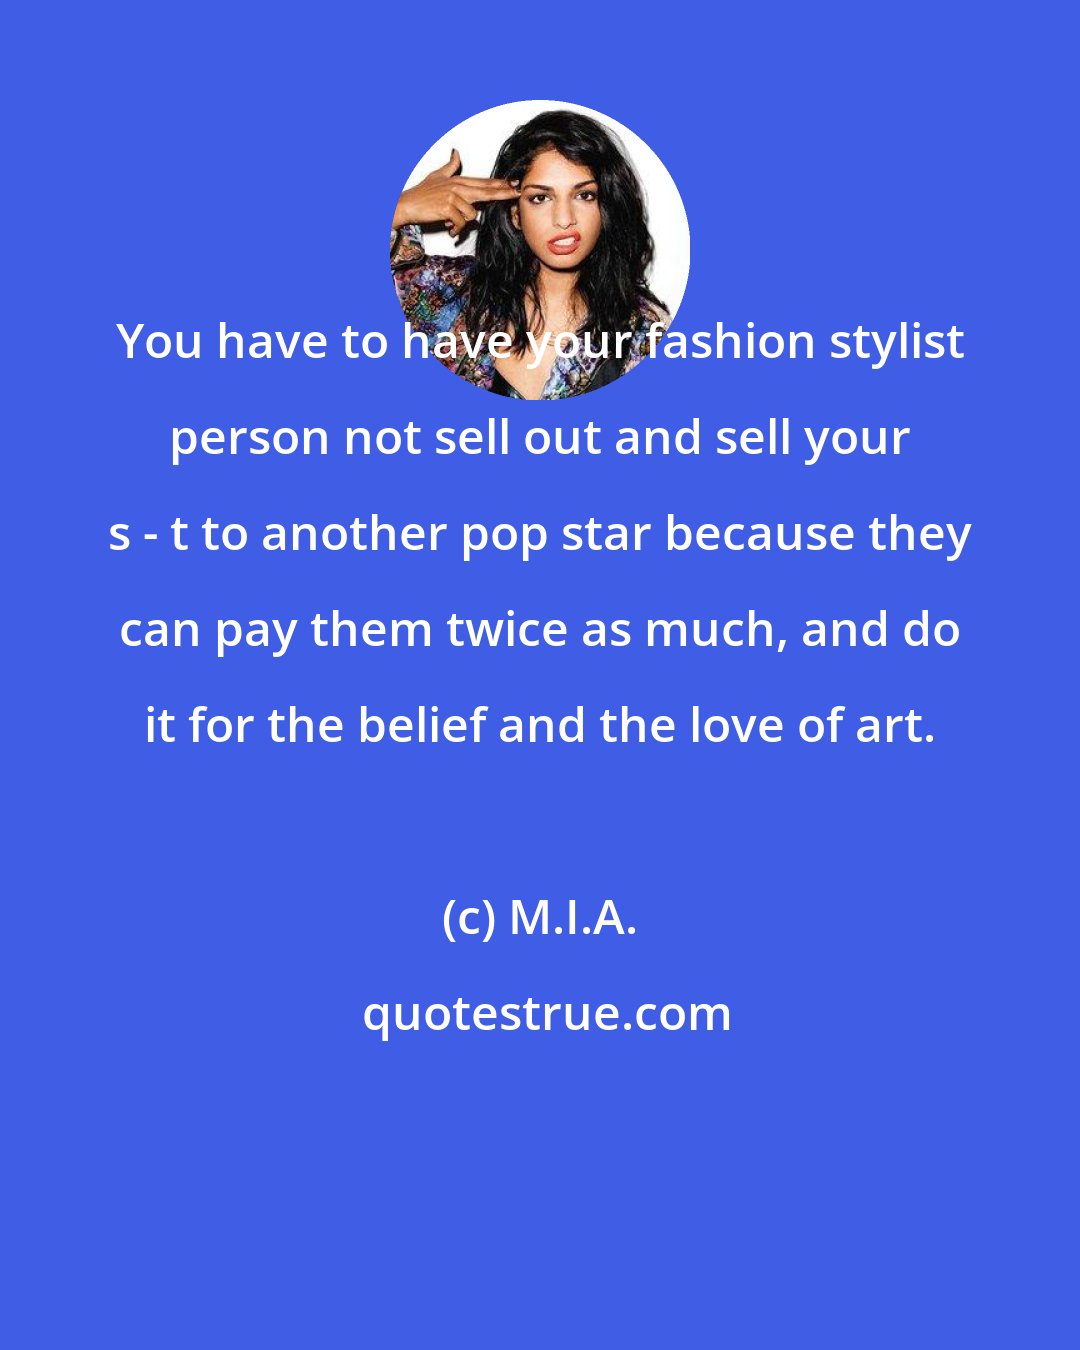 M.I.A.: You have to have your fashion stylist person not sell out and sell your s - t to another pop star because they can pay them twice as much, and do it for the belief and the love of art.